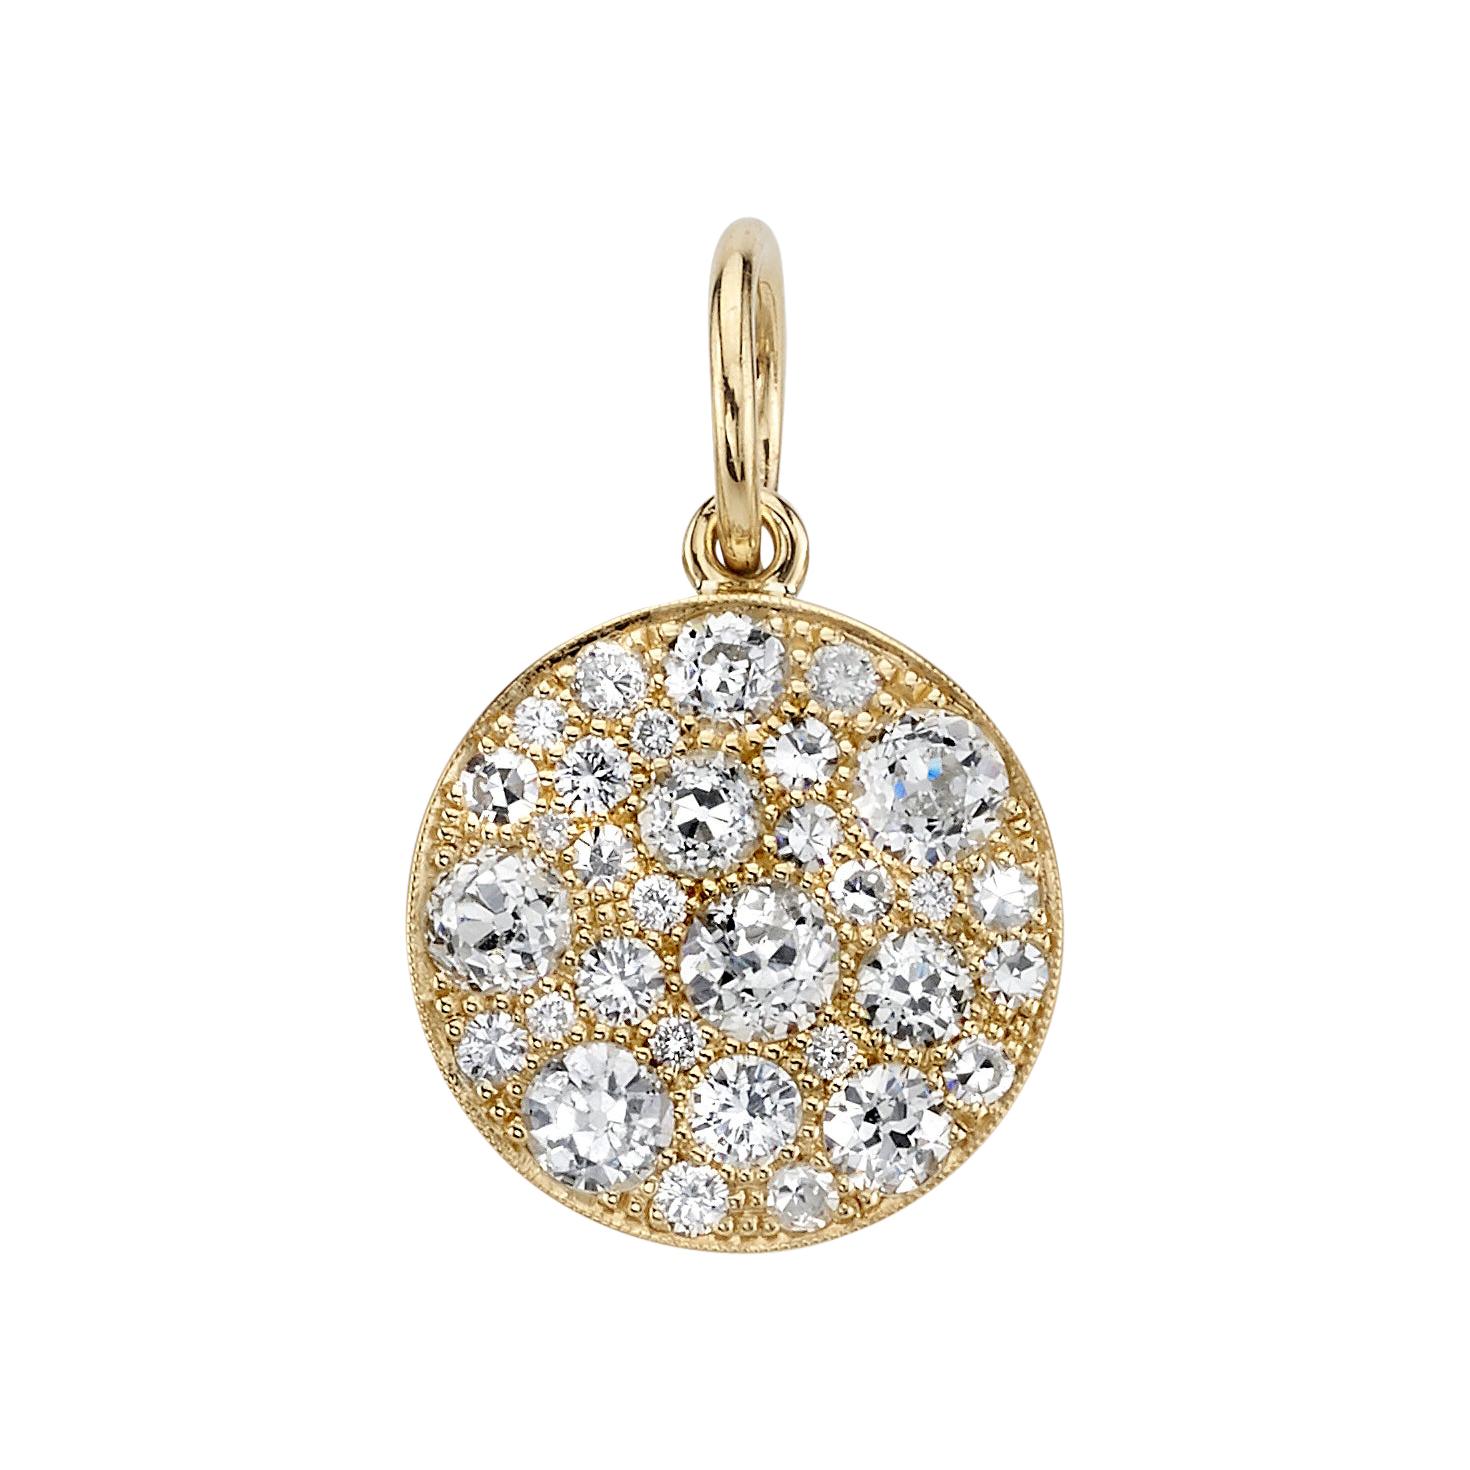 Handcrafted Round Cobblestone Mixed Cut Diamond Pendant by Single Stone For Sale